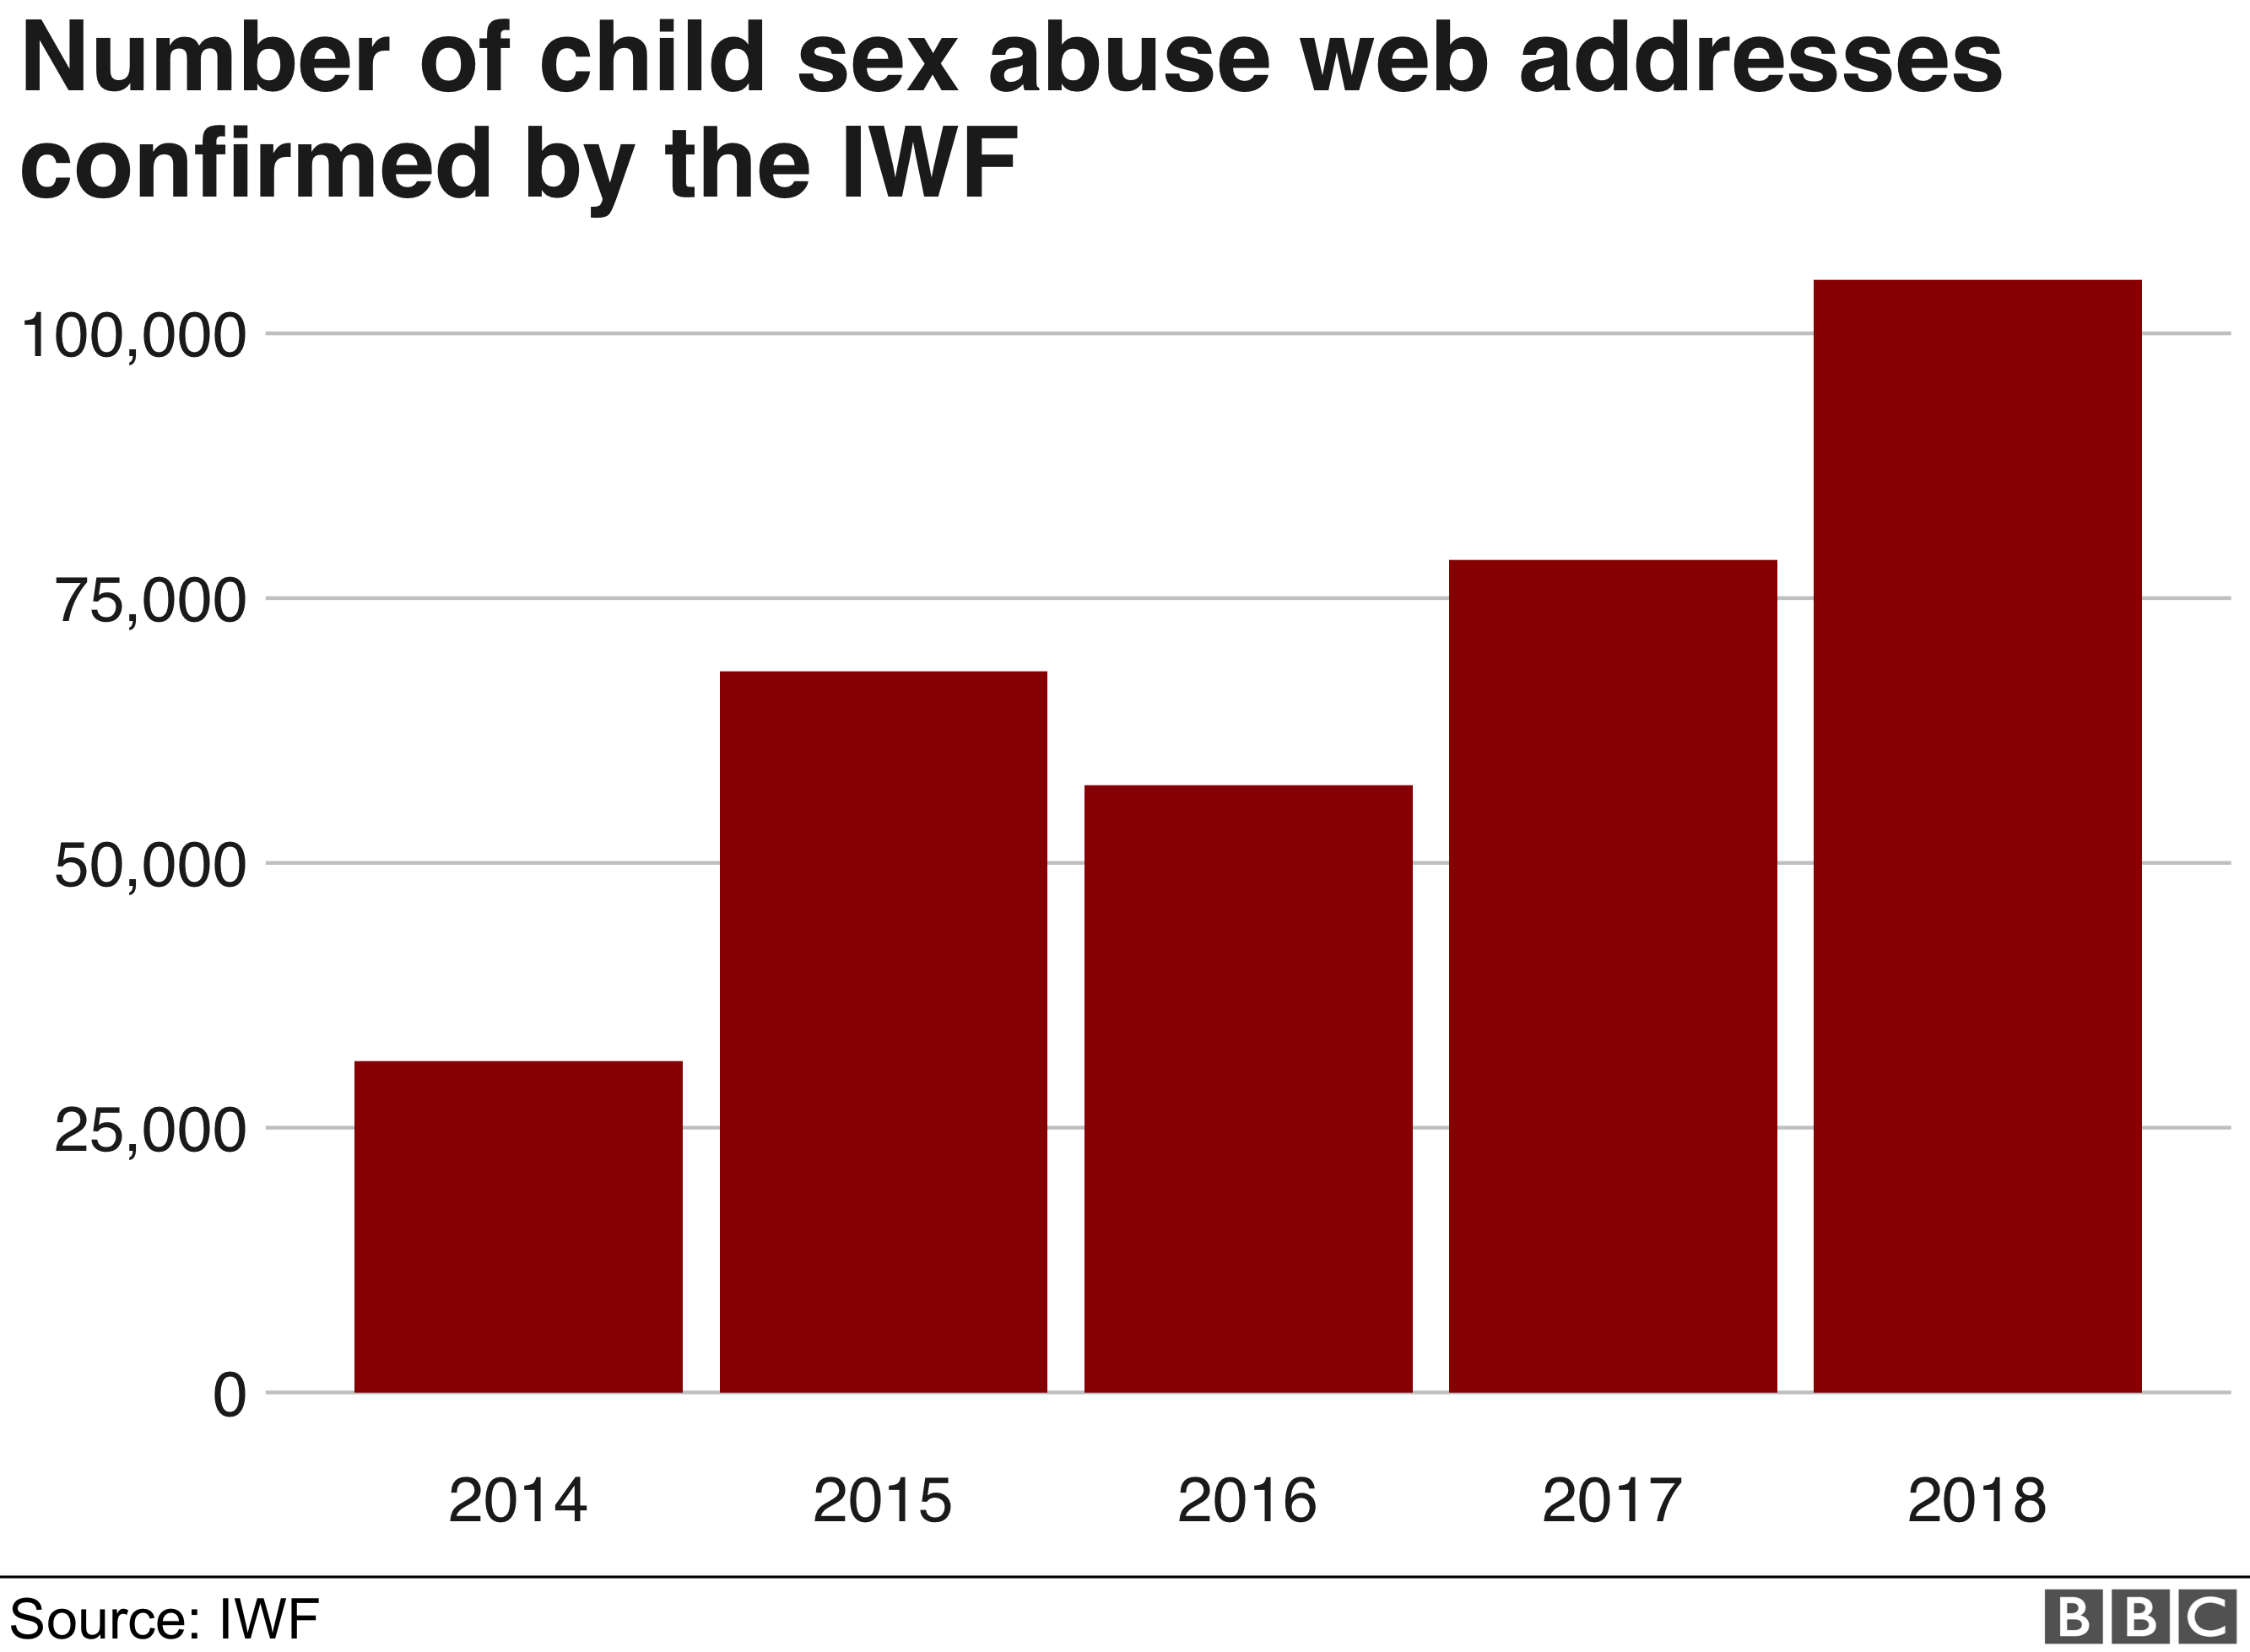 Number of child sex abuse web addresses confirmed by the IWF: more than 100,000 in 2018